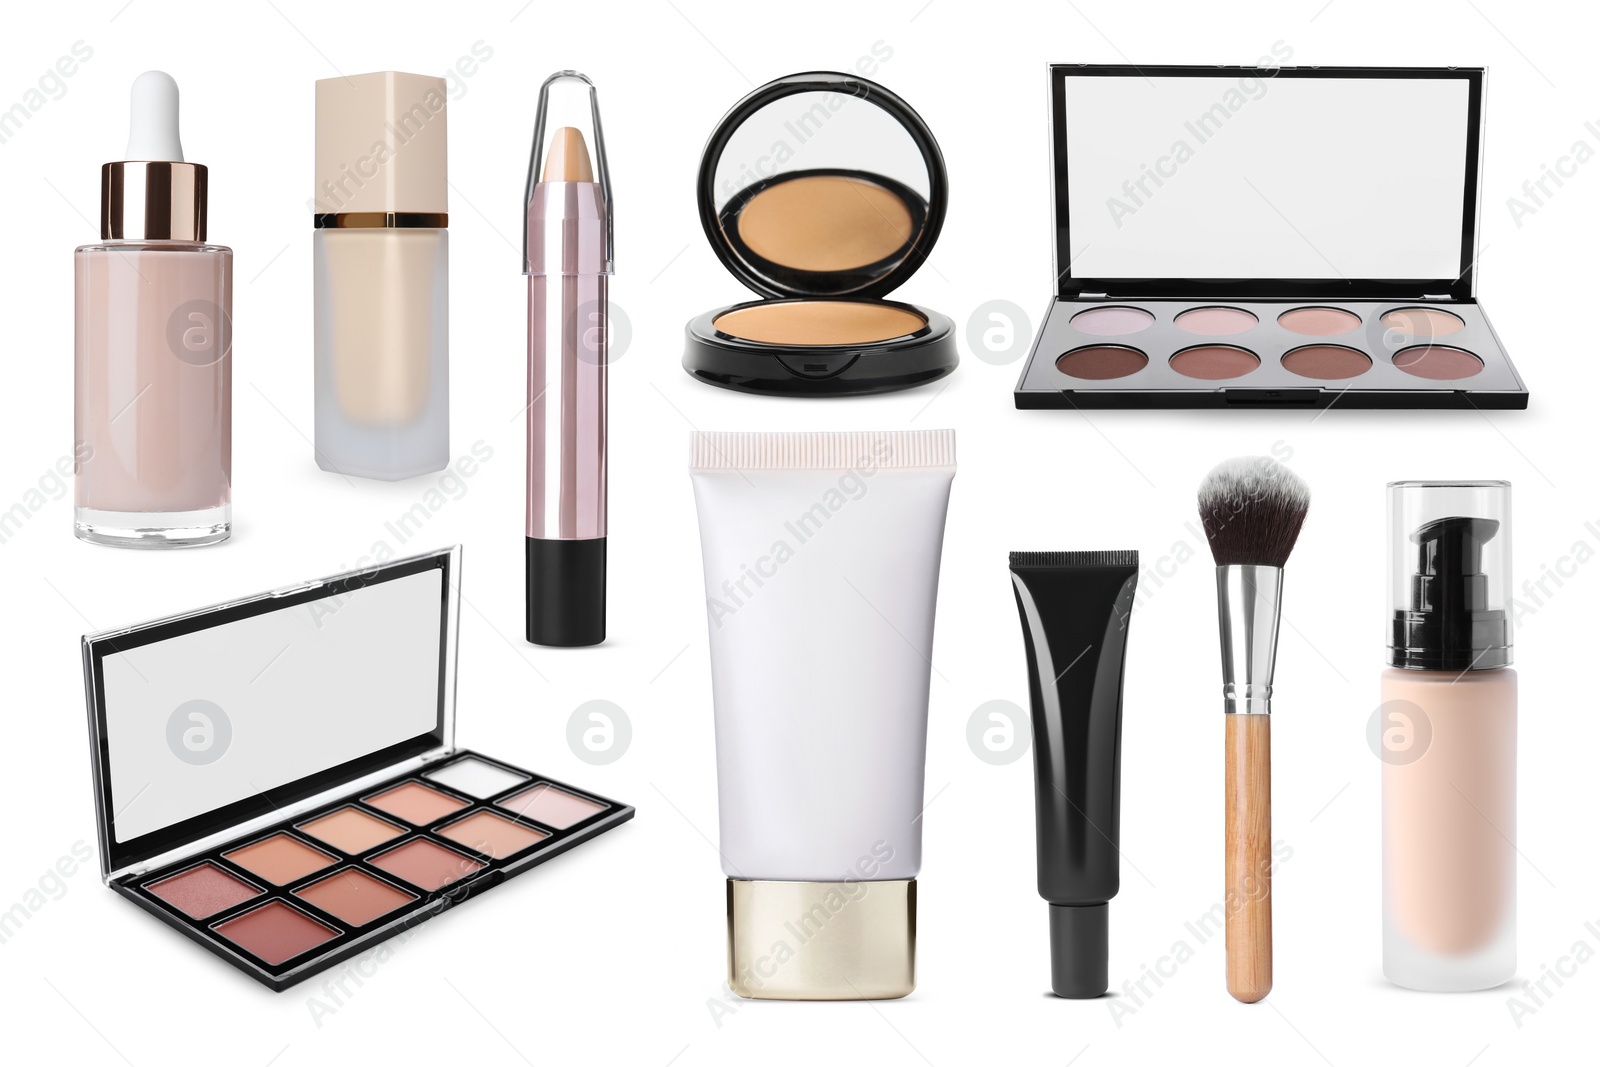 Image of Face powder, contouring pallets, concealer, liquid foundations and brush isolated on white. Collection of makeup products